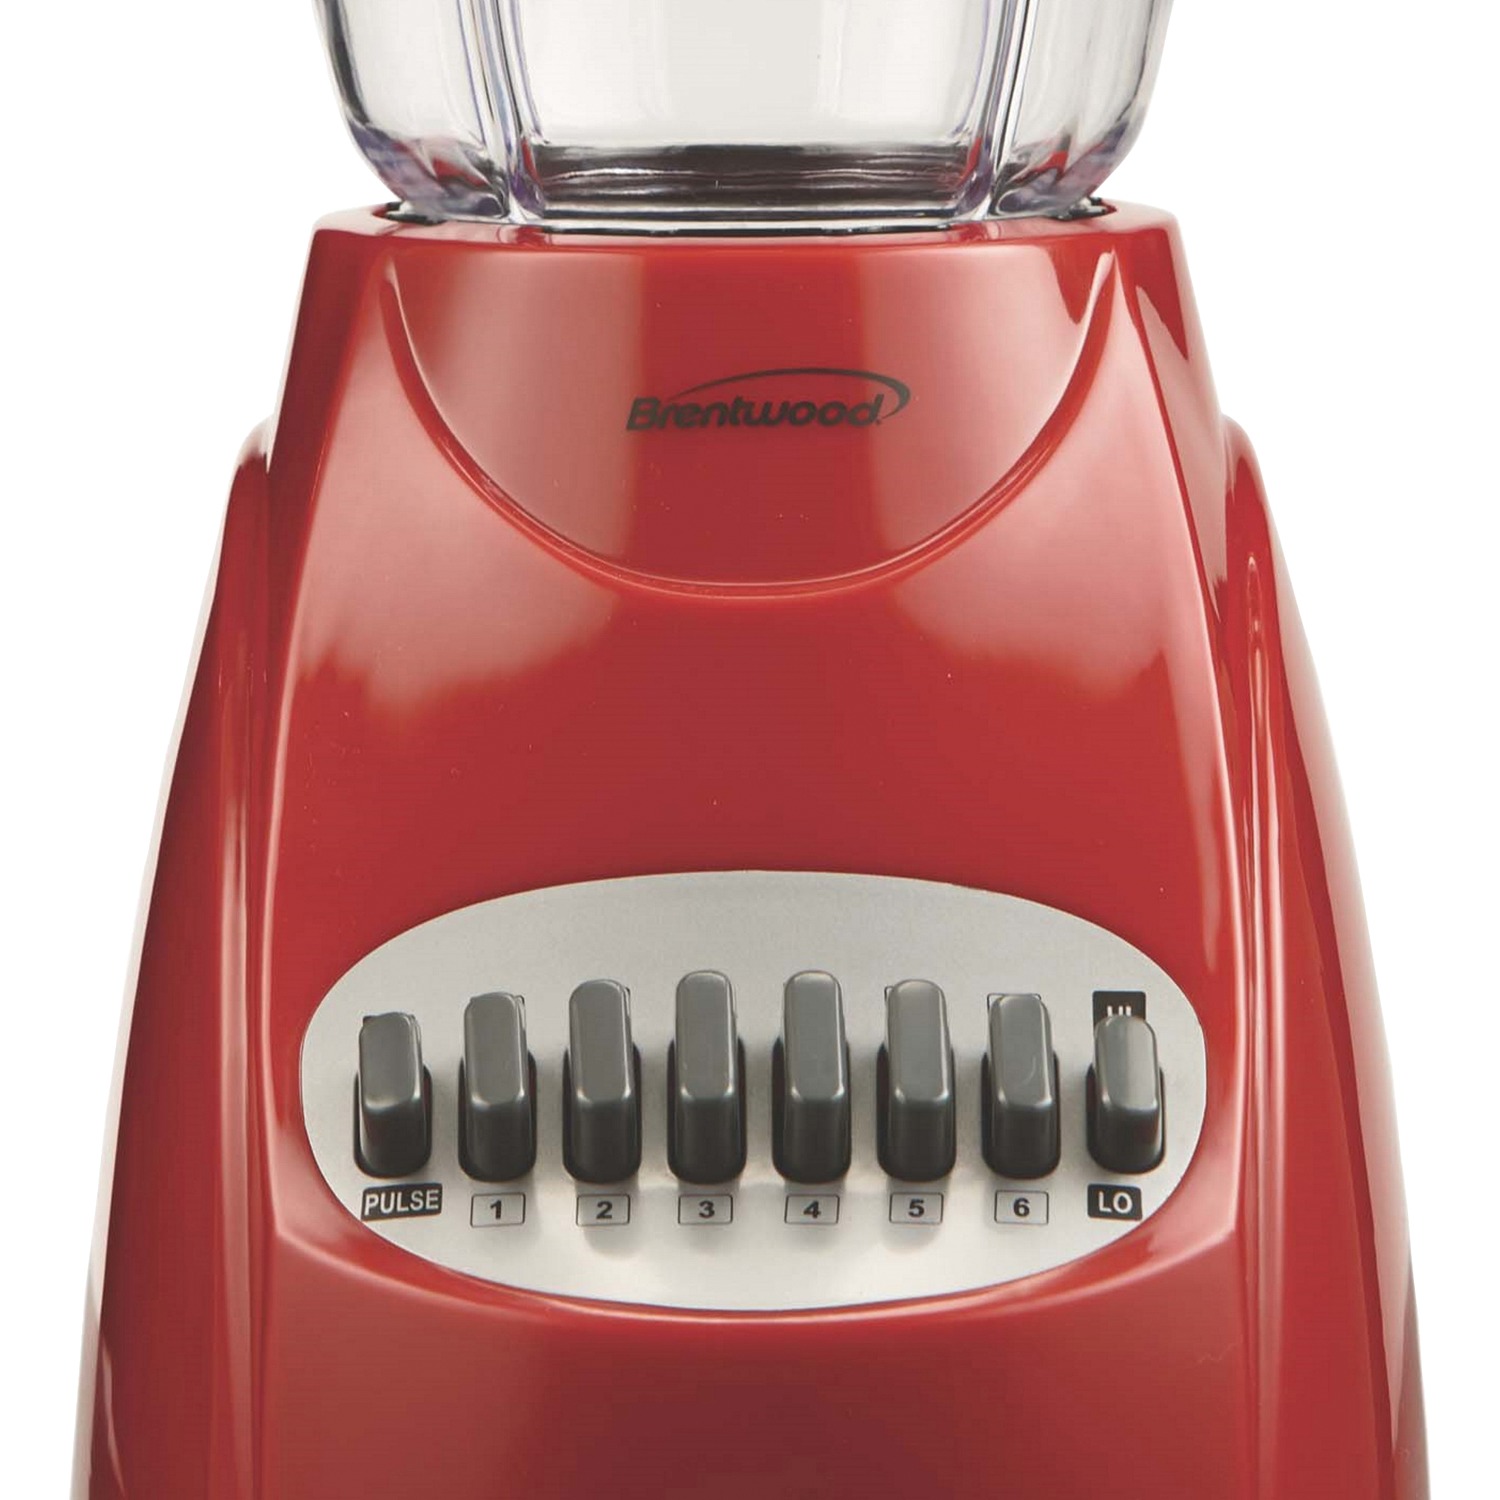 Brentwood Appliances Jb-220r 50-ounce 12-speed + Pulse Electric Blender with Plastic Jar (red) - image 5 of 12